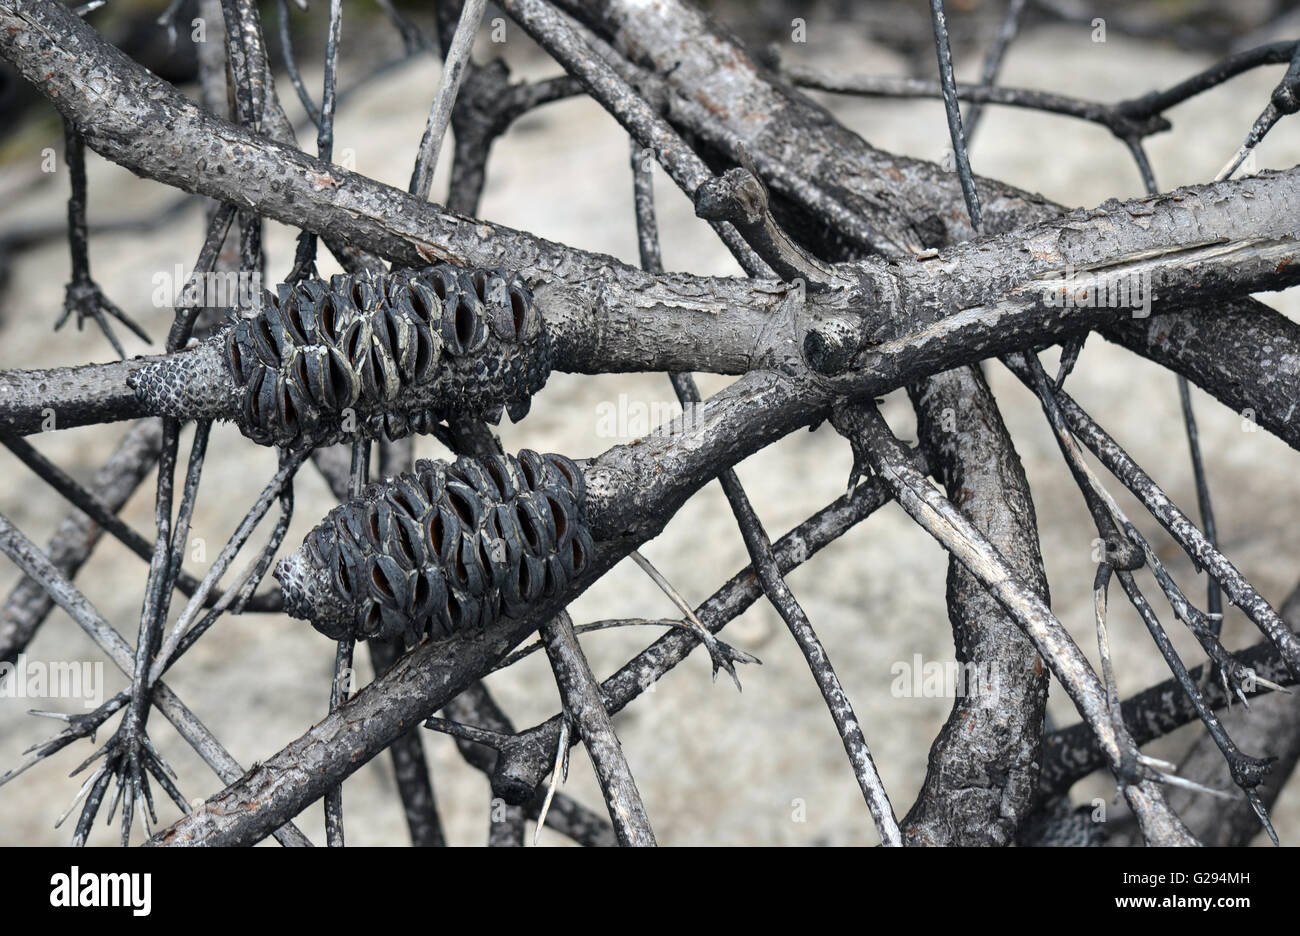 Burnt Australian Banksia tree branches after a bushfire Stock Photo